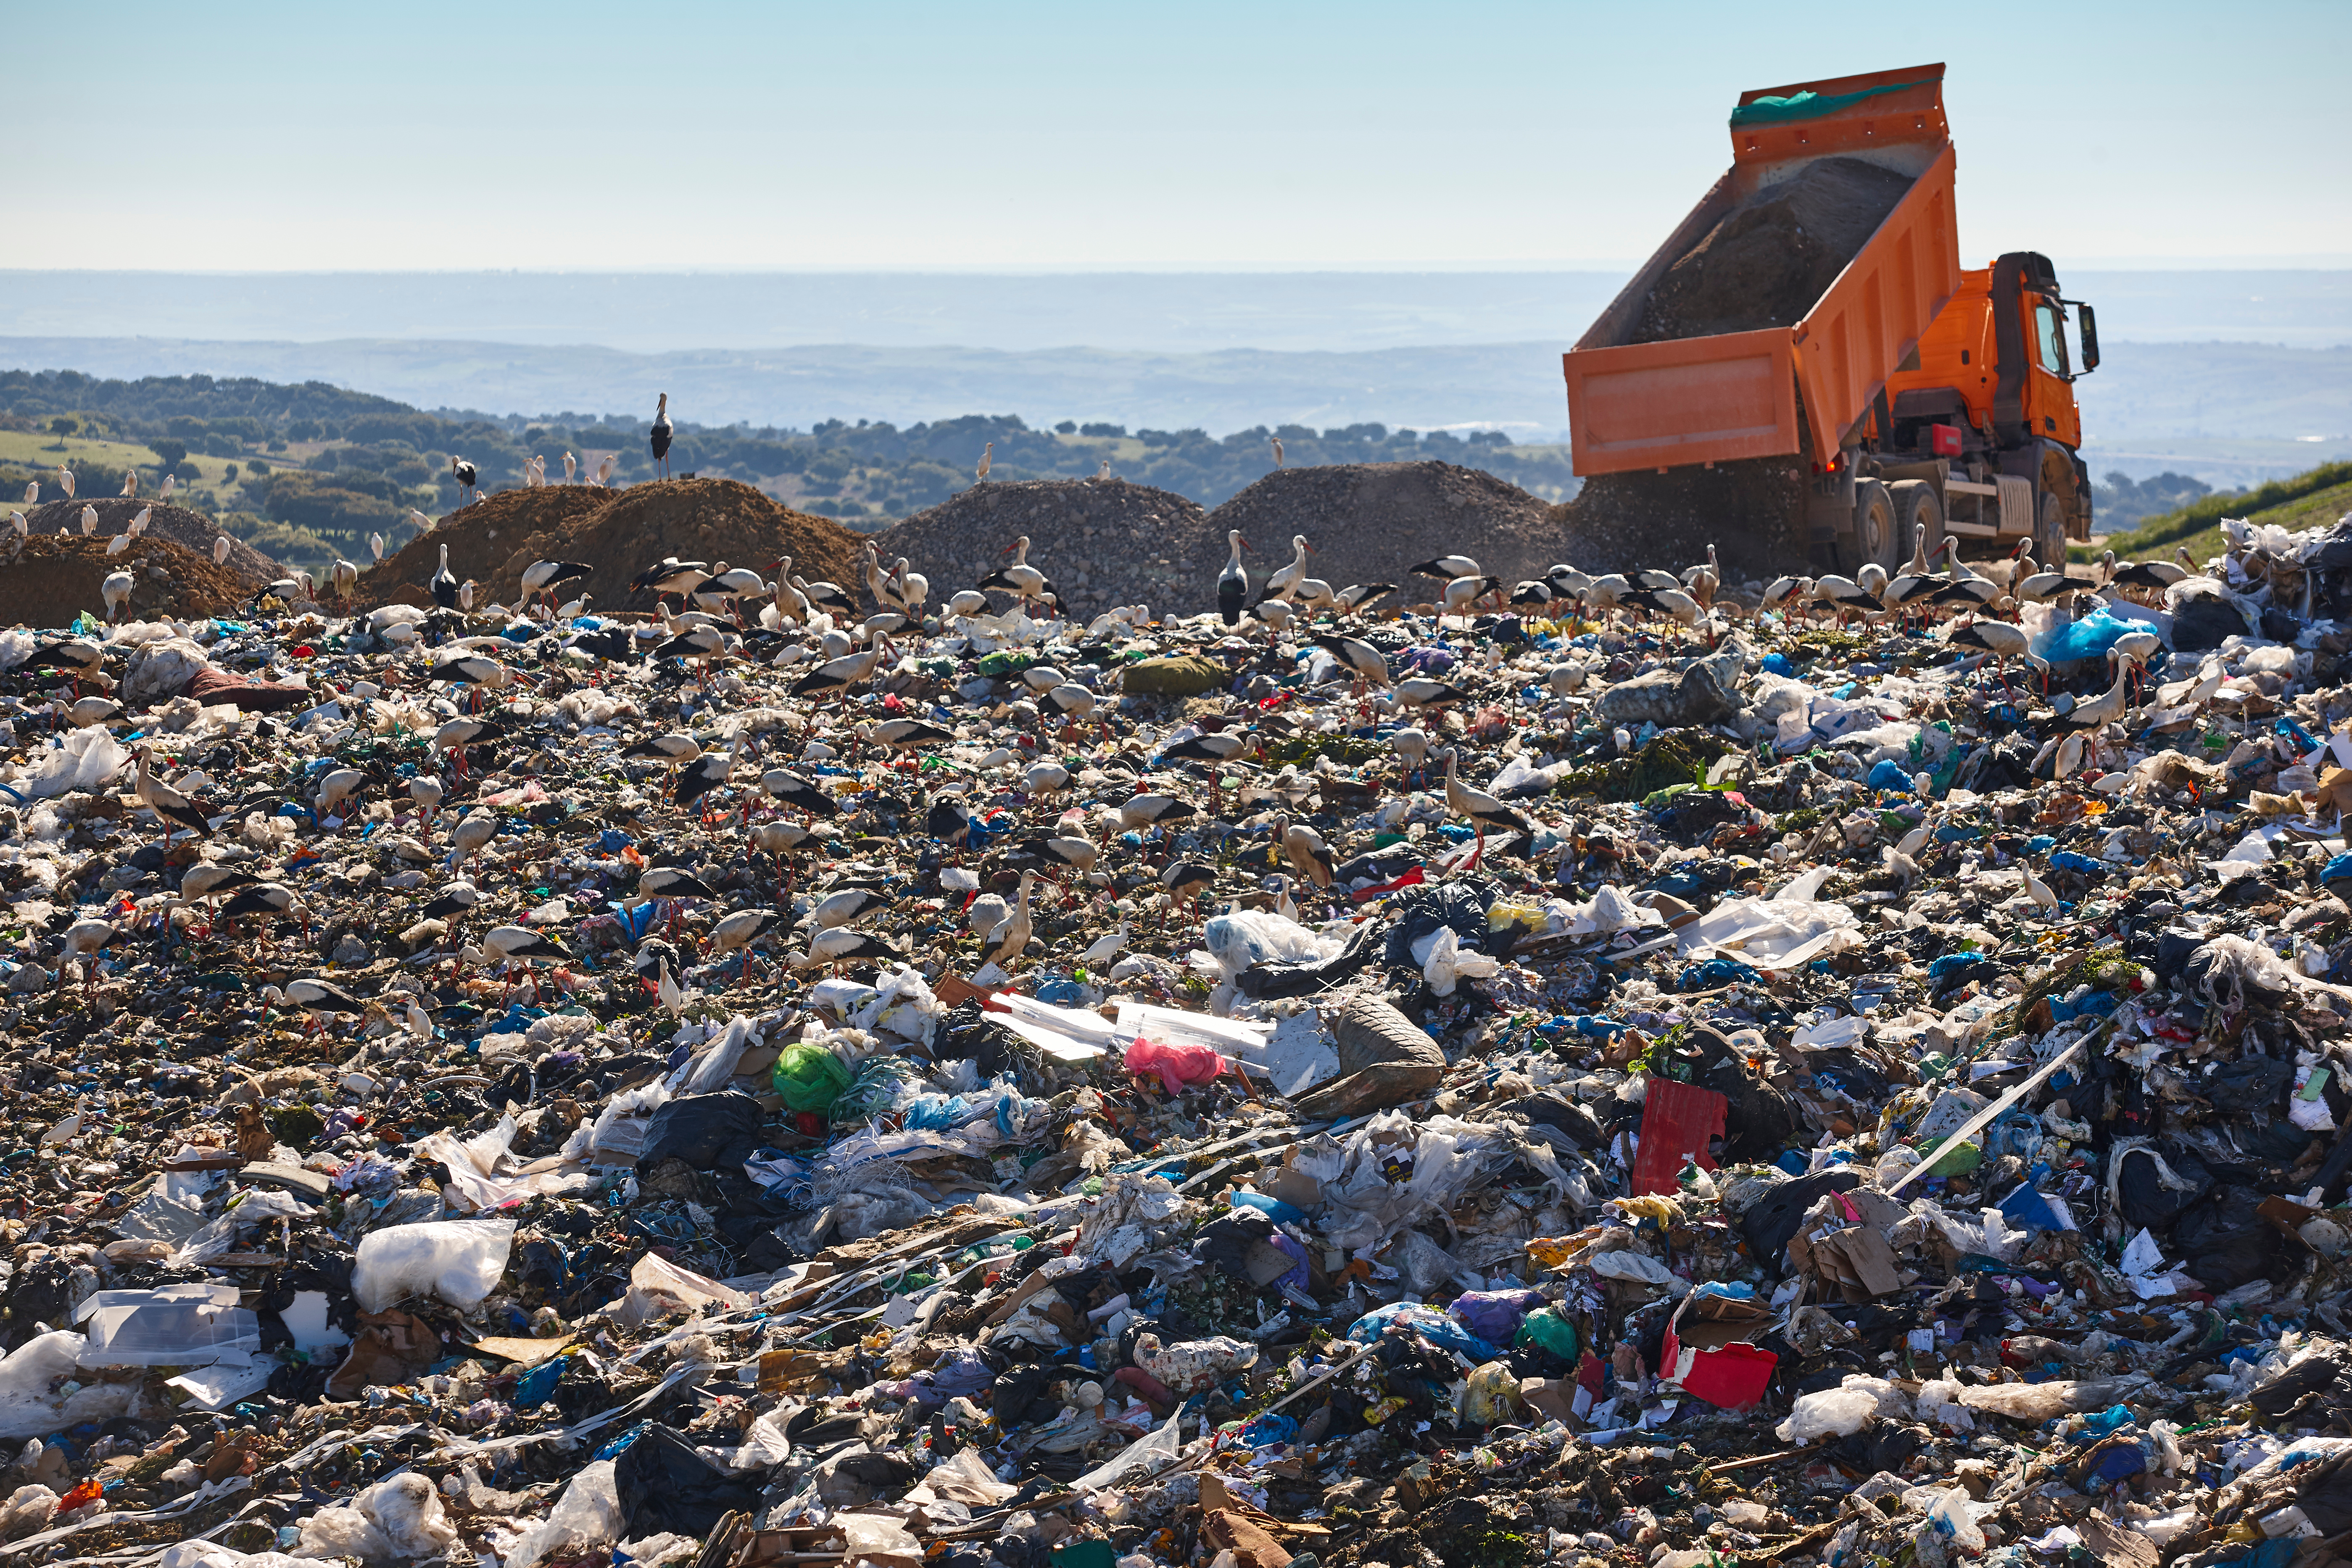 Landfills must be managed properly to prevent contamination